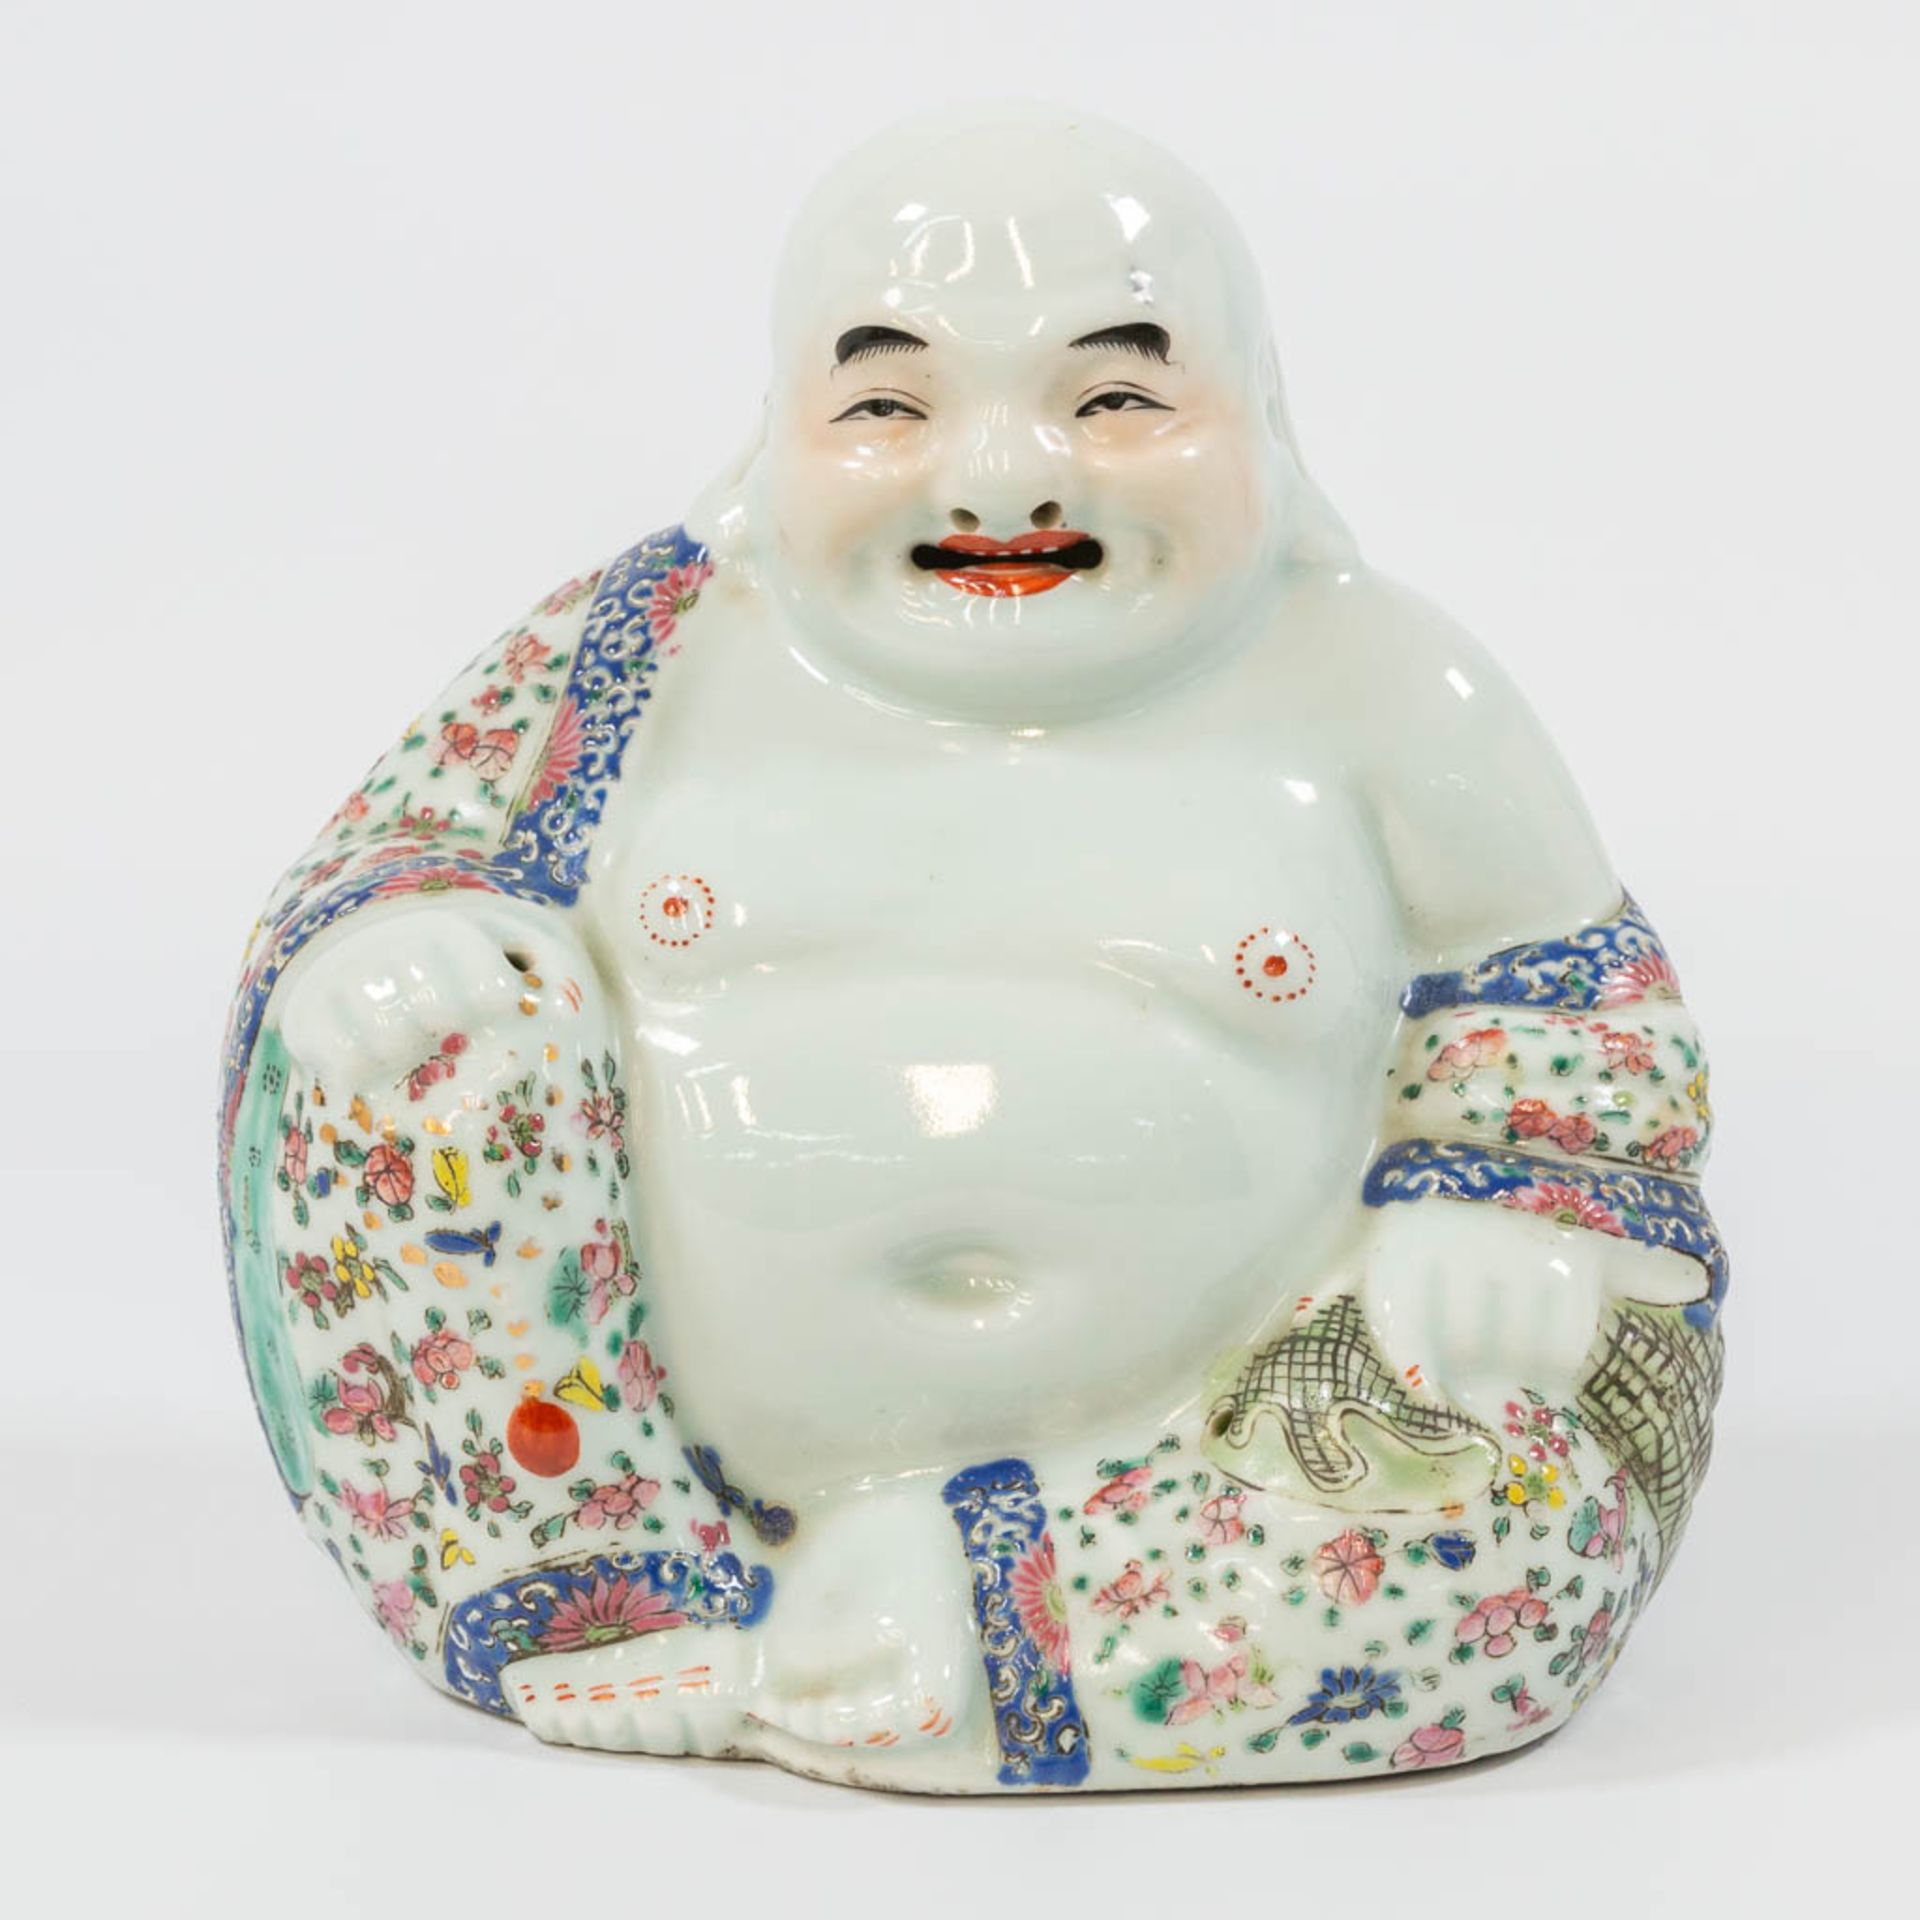 A Chinese laughing buddha, made of porcelain.